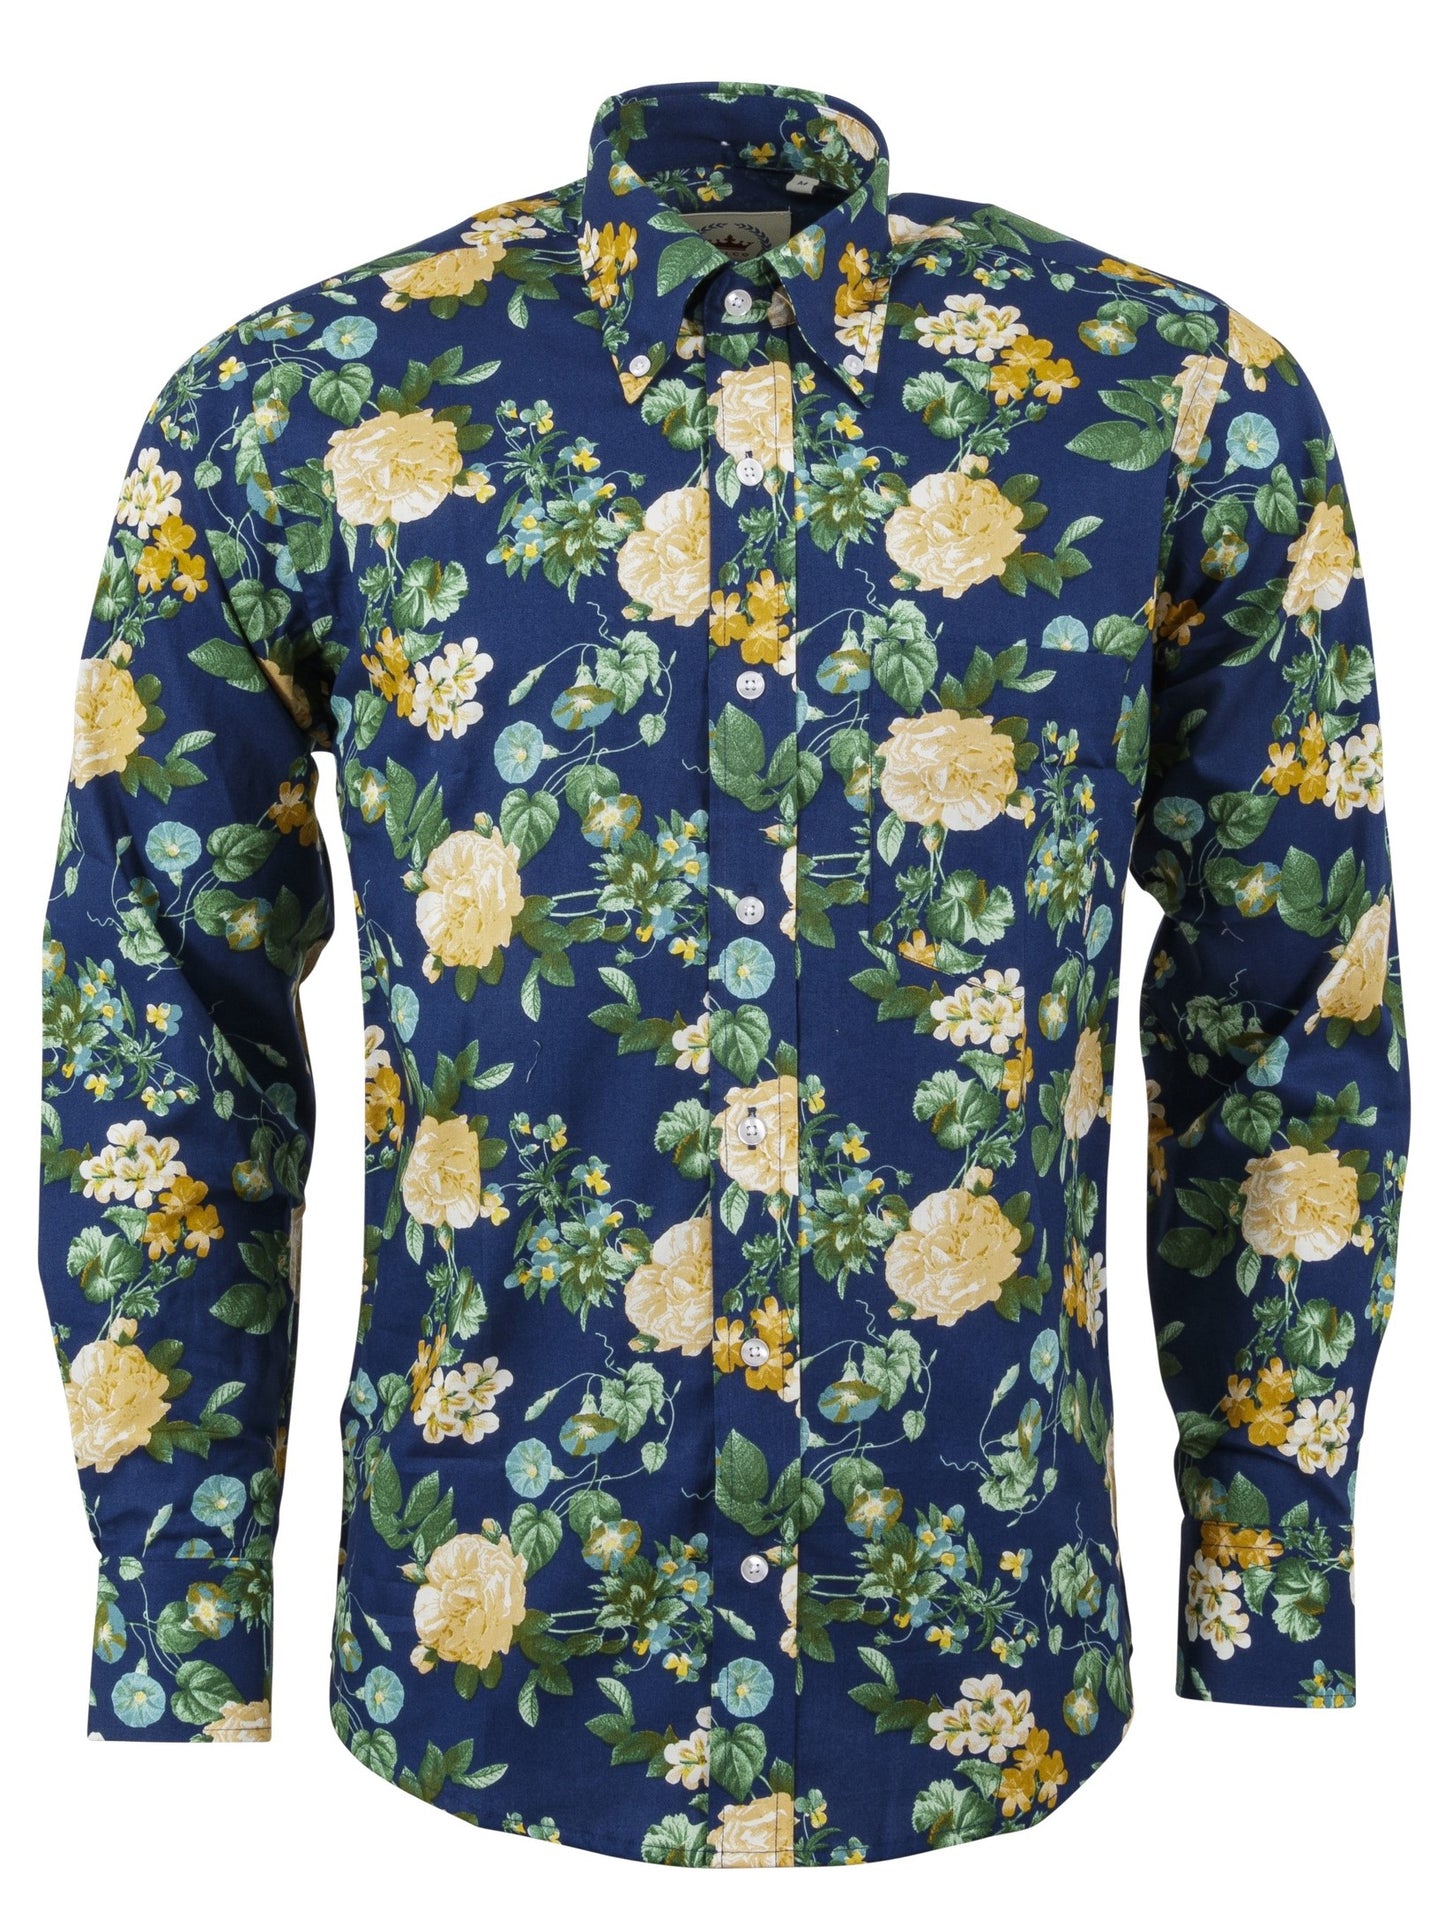 Relco Blue Floral Long Sleeved Retro Mod Button Down Shirt